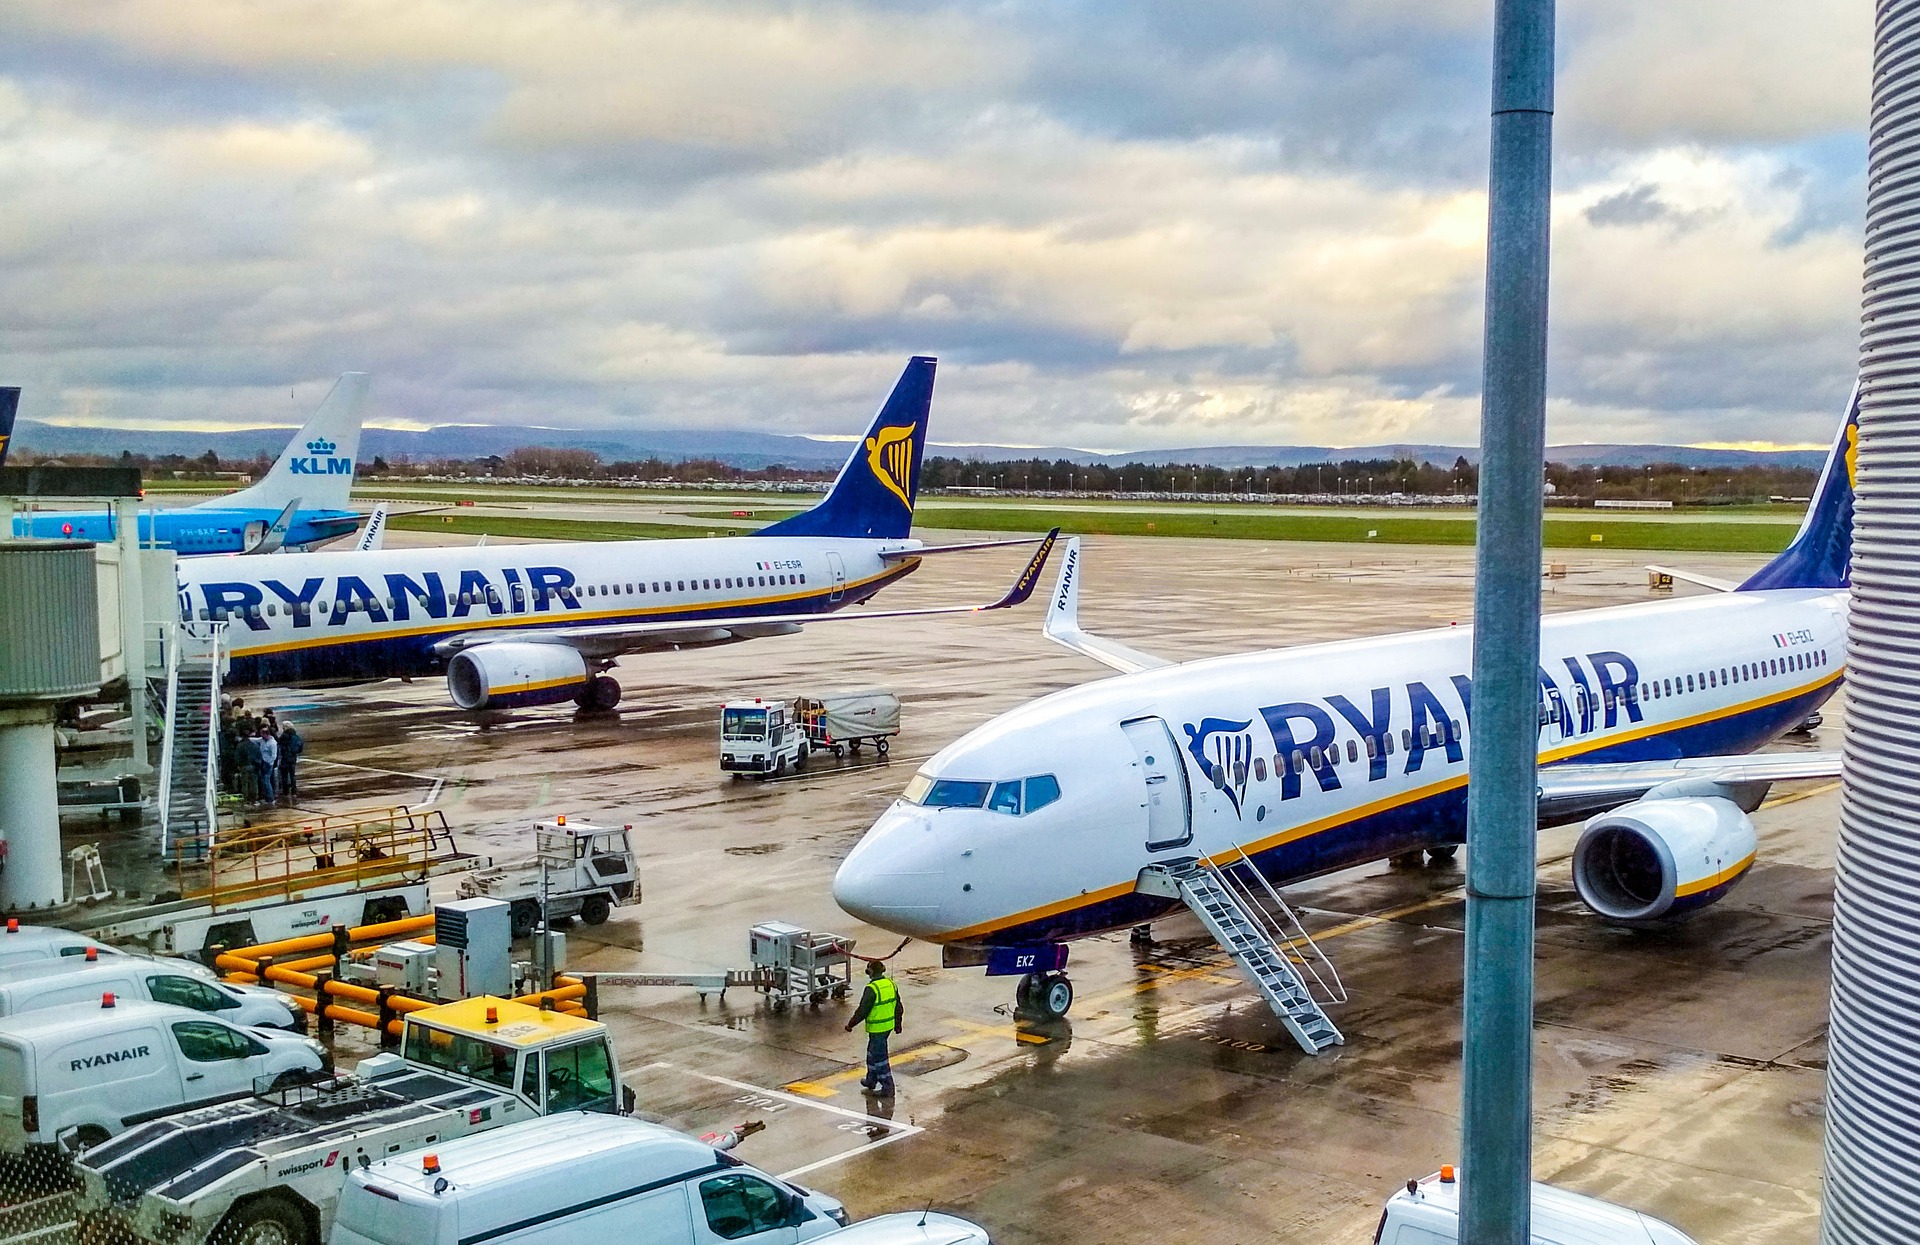 Ryanair planes at stand.